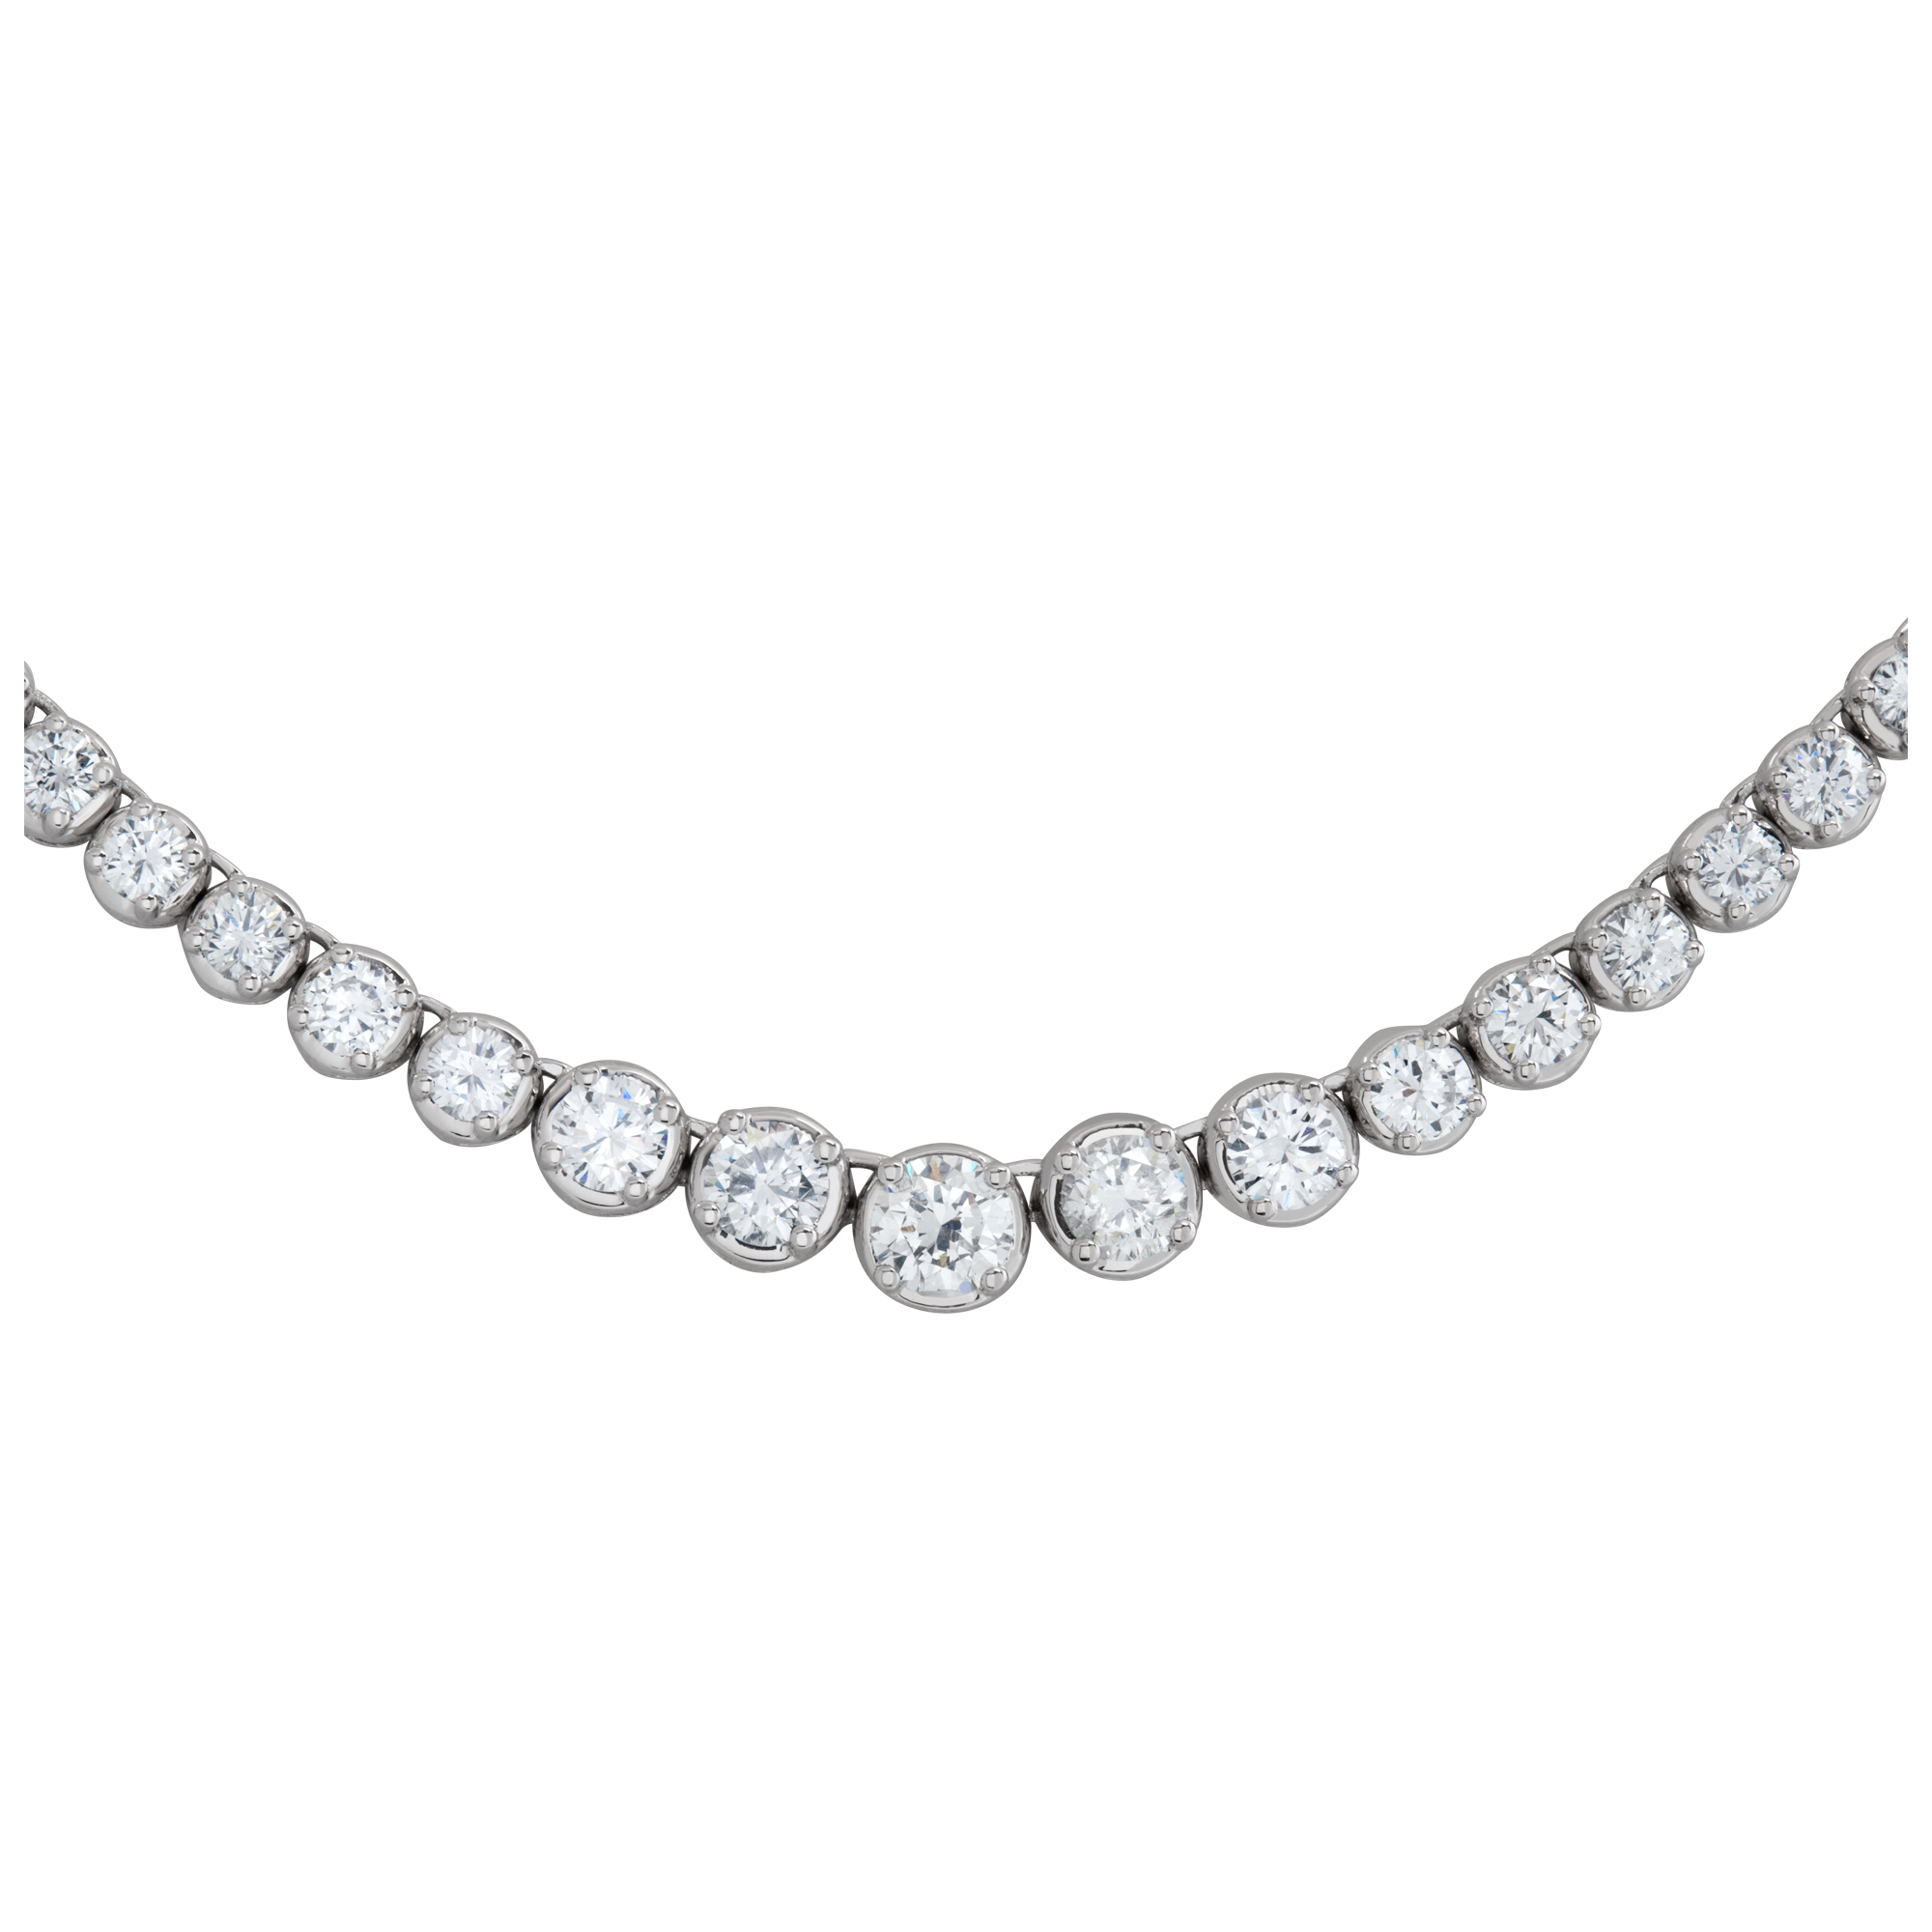 Diamond line necklace with aprox 6.00 carats round brilliant cut diamonds set in 18k white gold